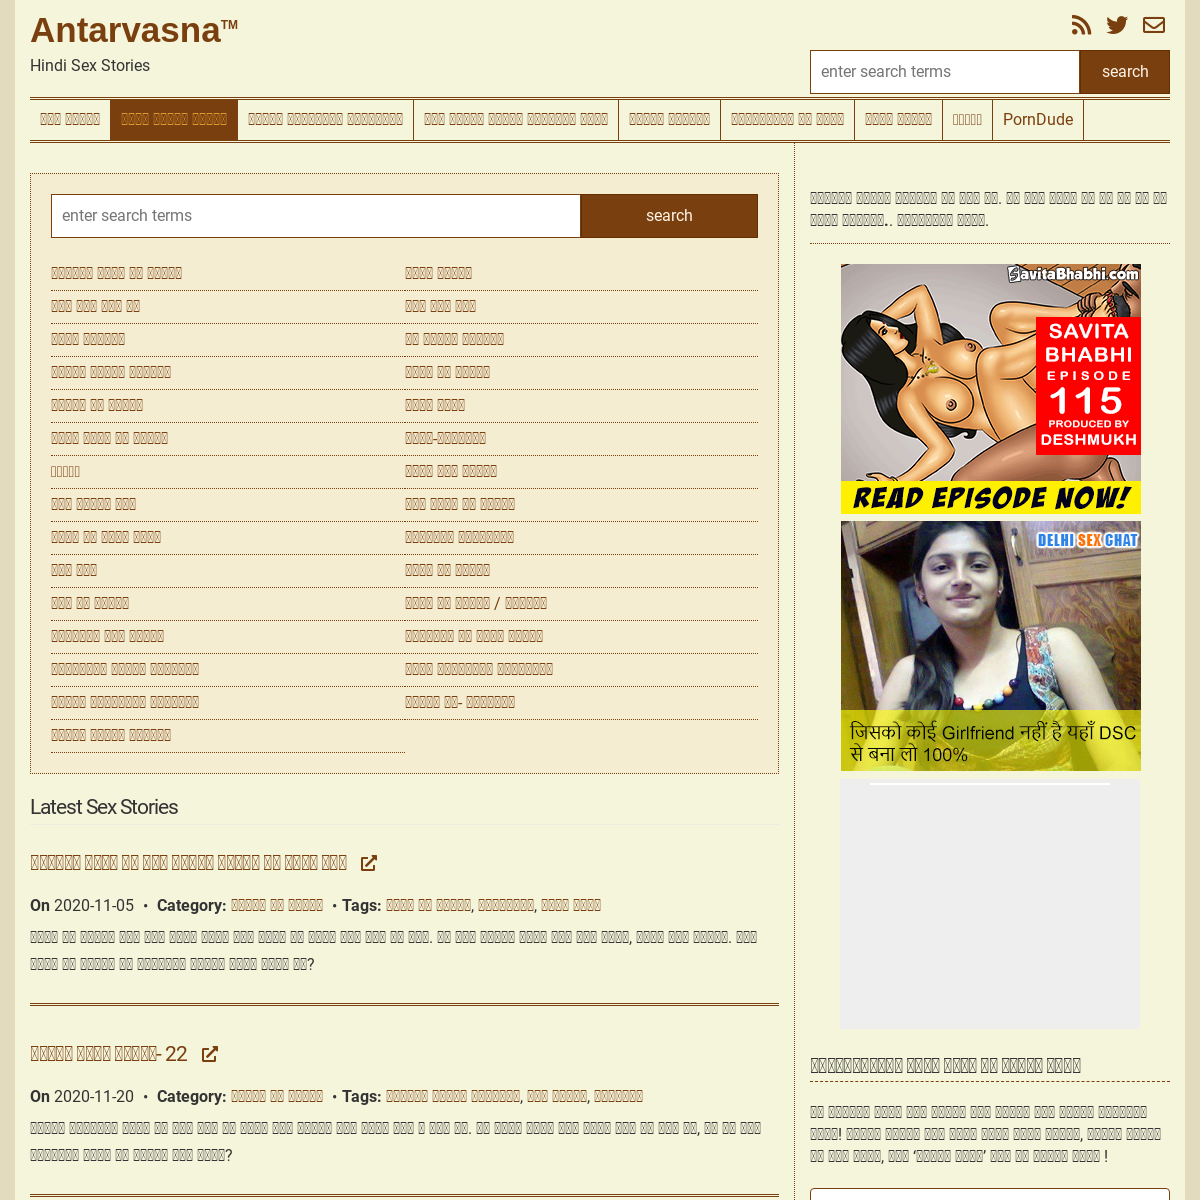 A complete backup of antarvasna.com